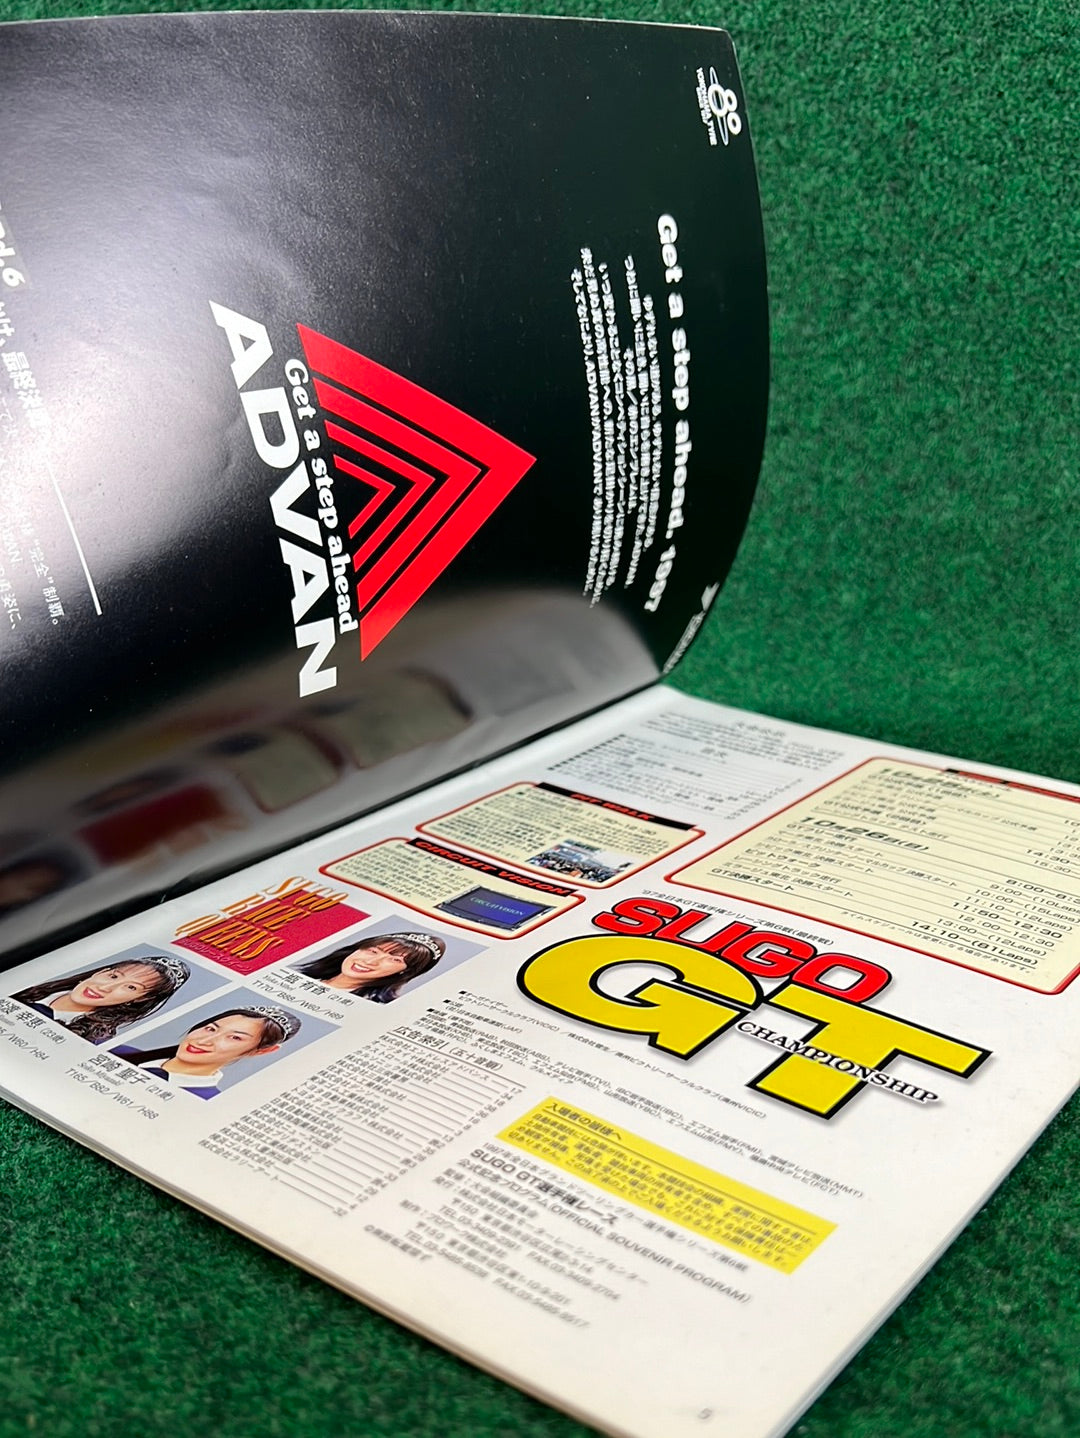 JGTC - 1997 All Japan GT Championship Round 6 at SUGO Race Event Program